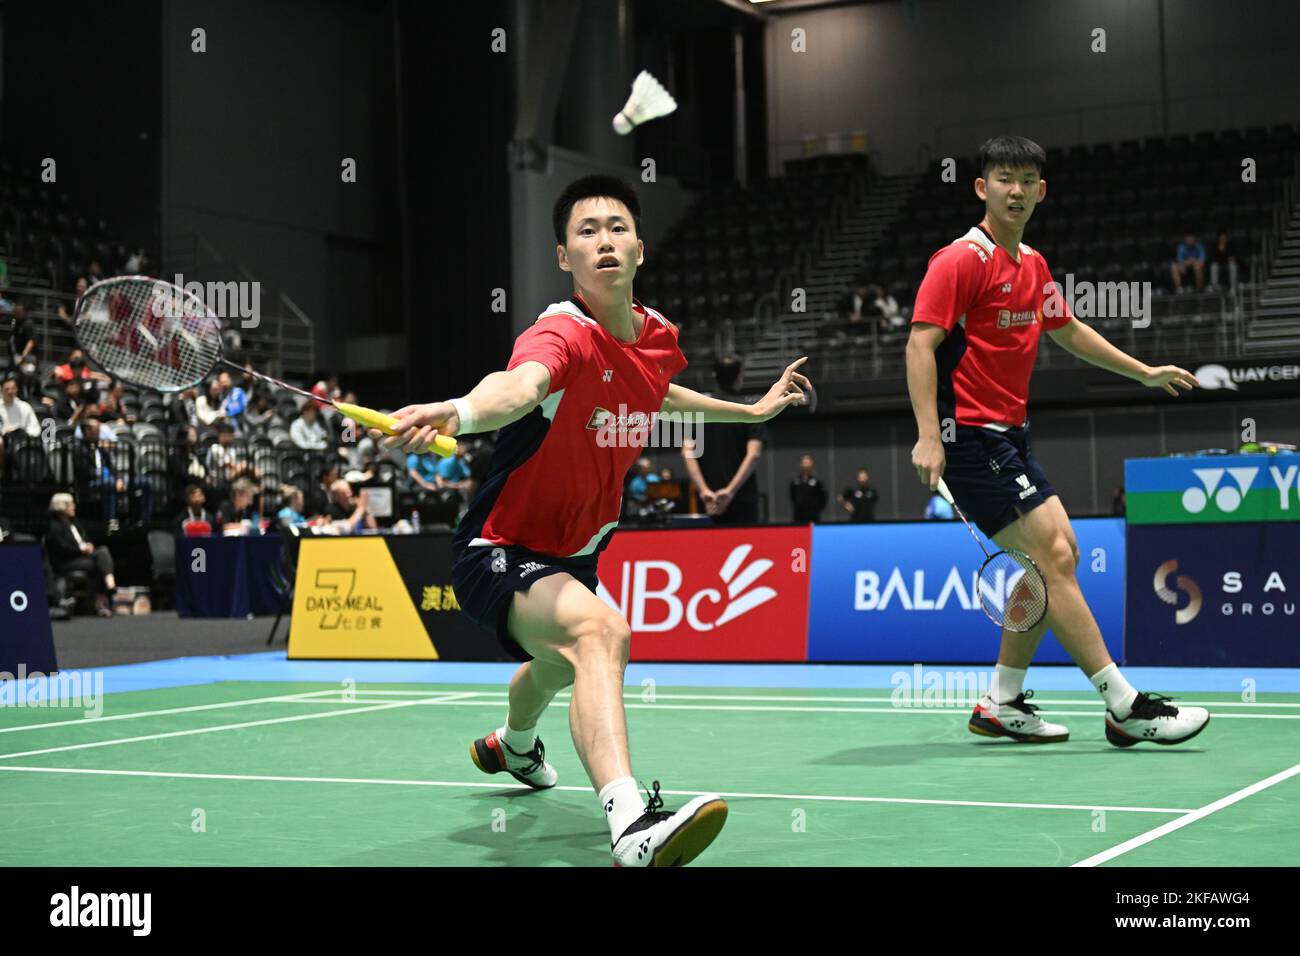 Sydney, Australia. 17th Nov, 2022. Ou Xuan Yi (L) and Liu Yu Chen (R) of China seen during the 2022 SATHIO GROUP Australian Badminton Open men's double round of 16 match against Choi Sol Gyu and Kim Won Ho of Korea. Liu and Ou won the match 18-21, 21-18, 21-18. Credit: SOPA Images Limited/Alamy Live News Stock Photo